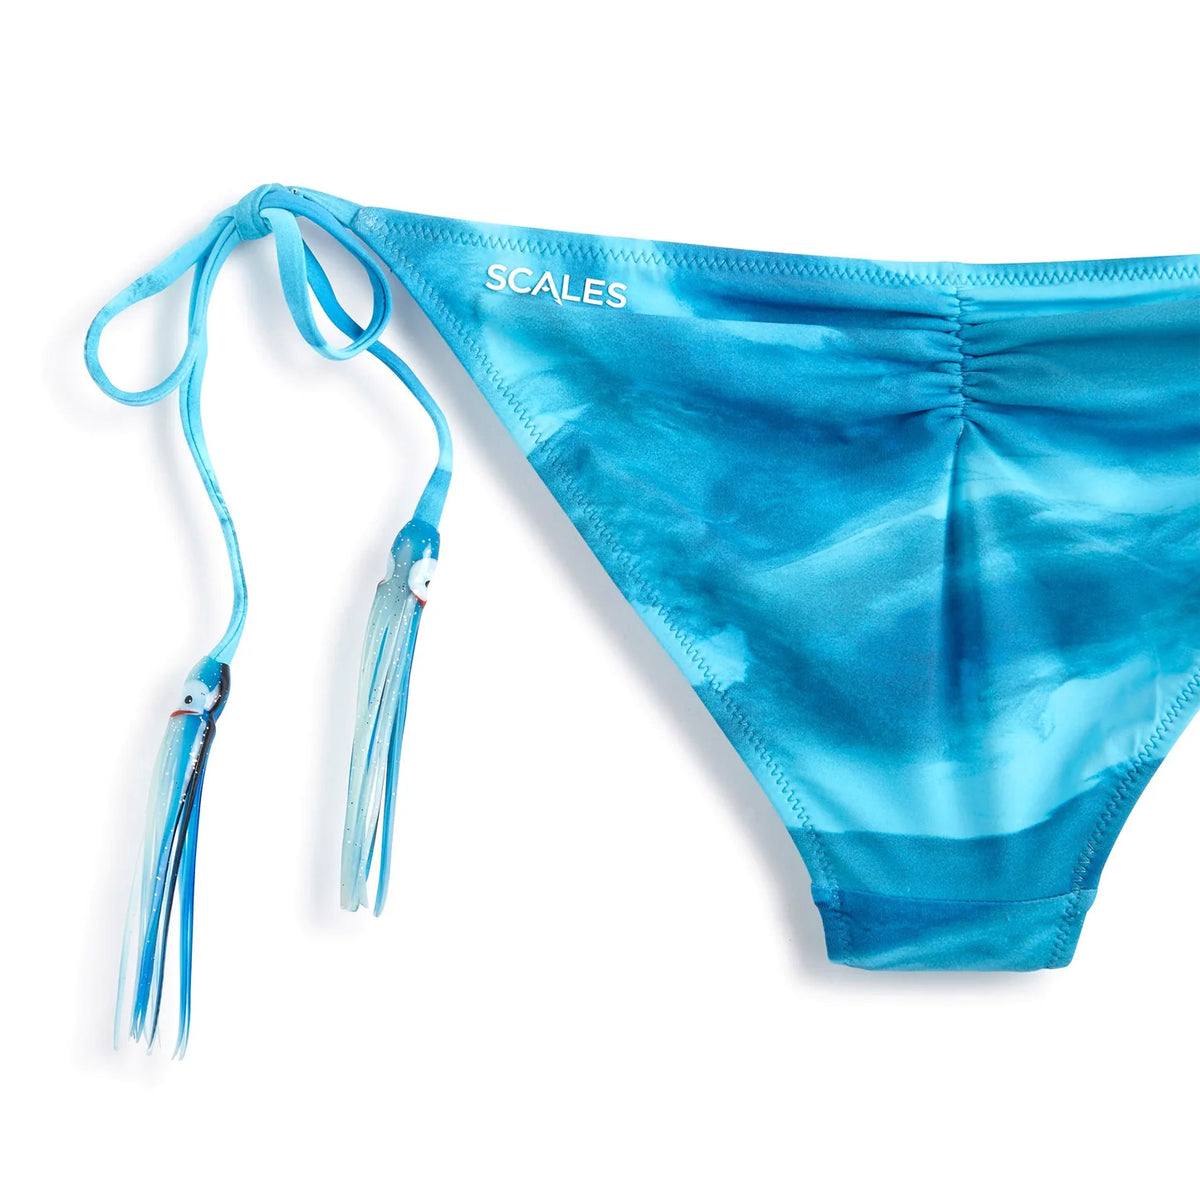 SCALES Bahamas Current Baiting Suit Bottom AC